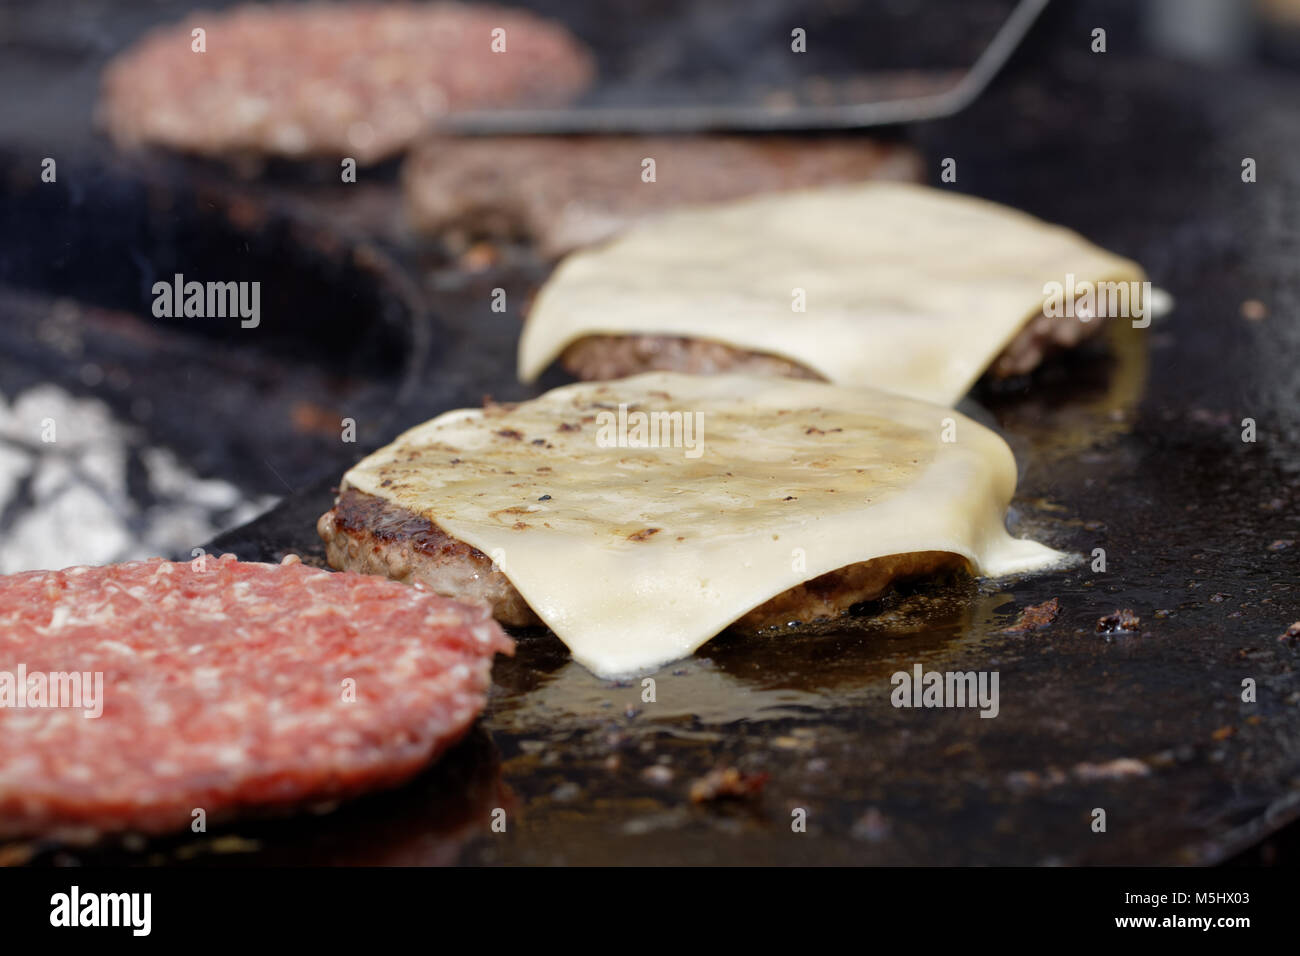 Roasting burgers on an outdoors stove in a street food restaurant Stock Photo